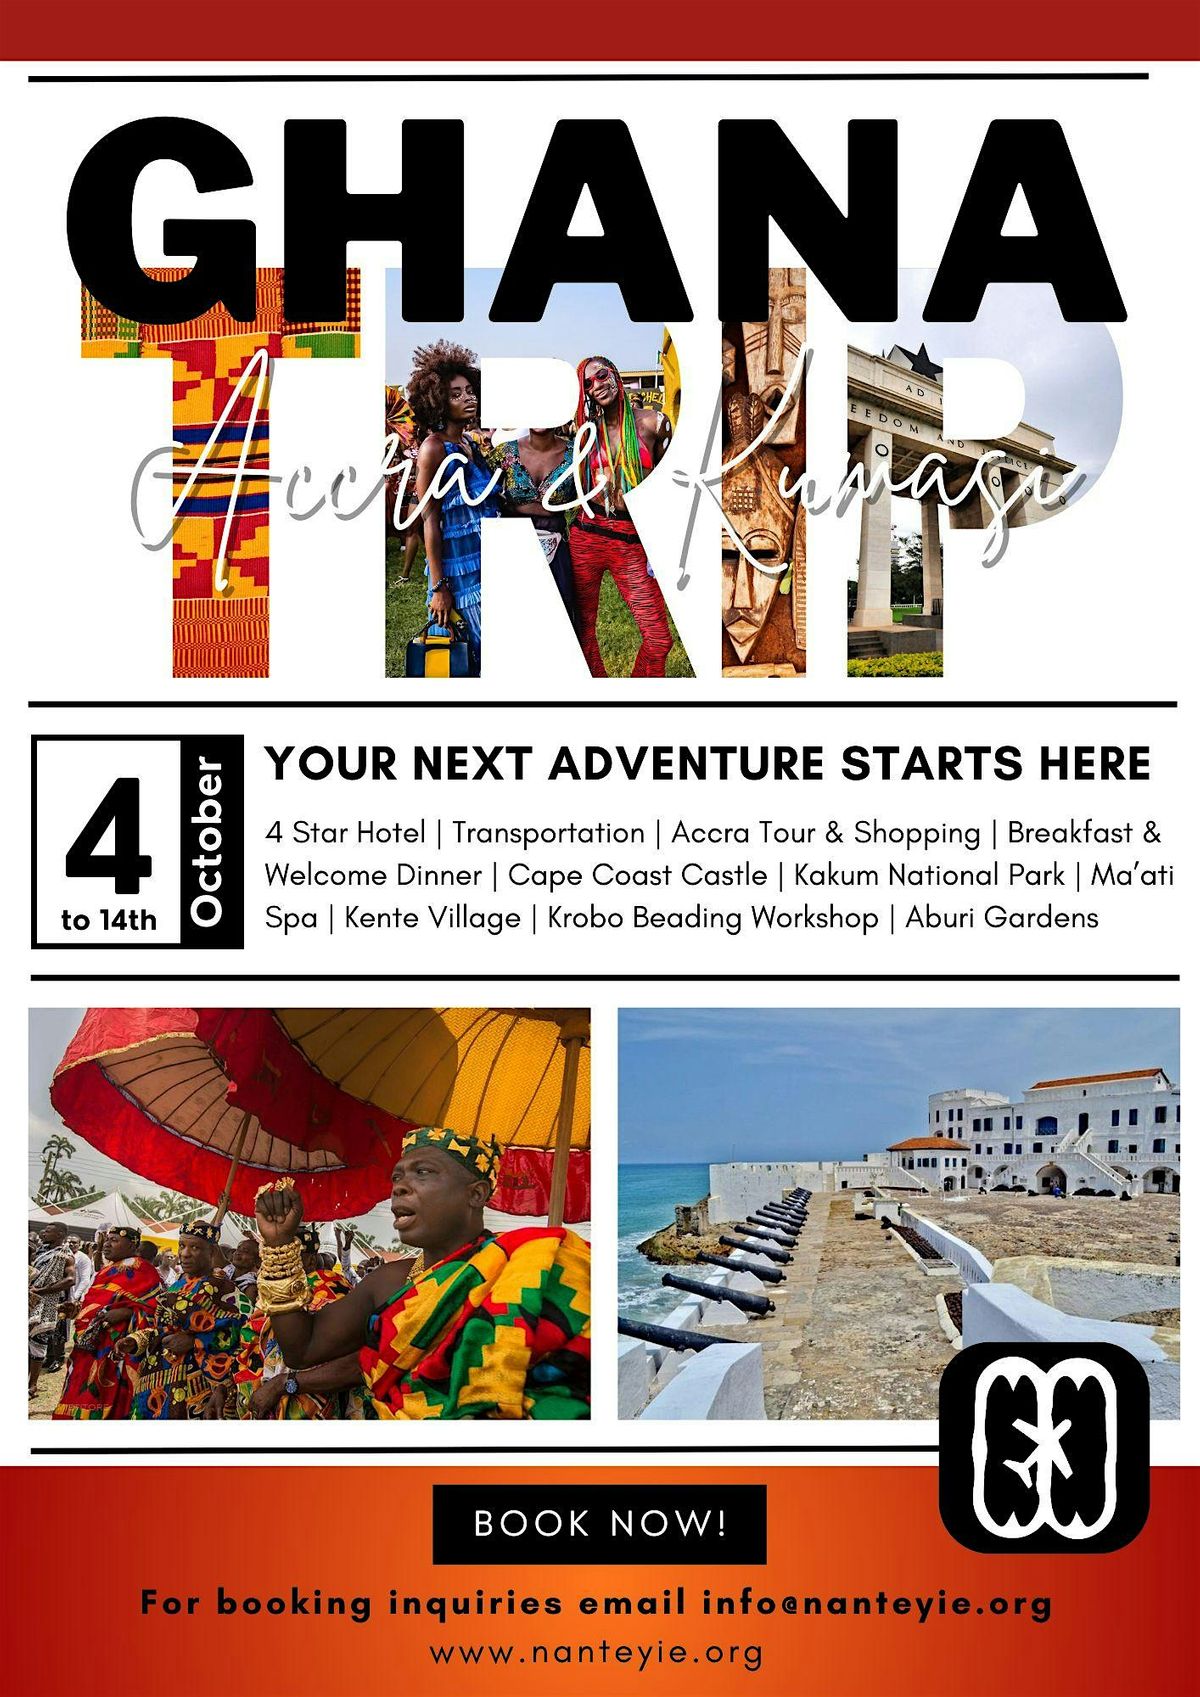 Travel to Ghana from October 7th - 14th!